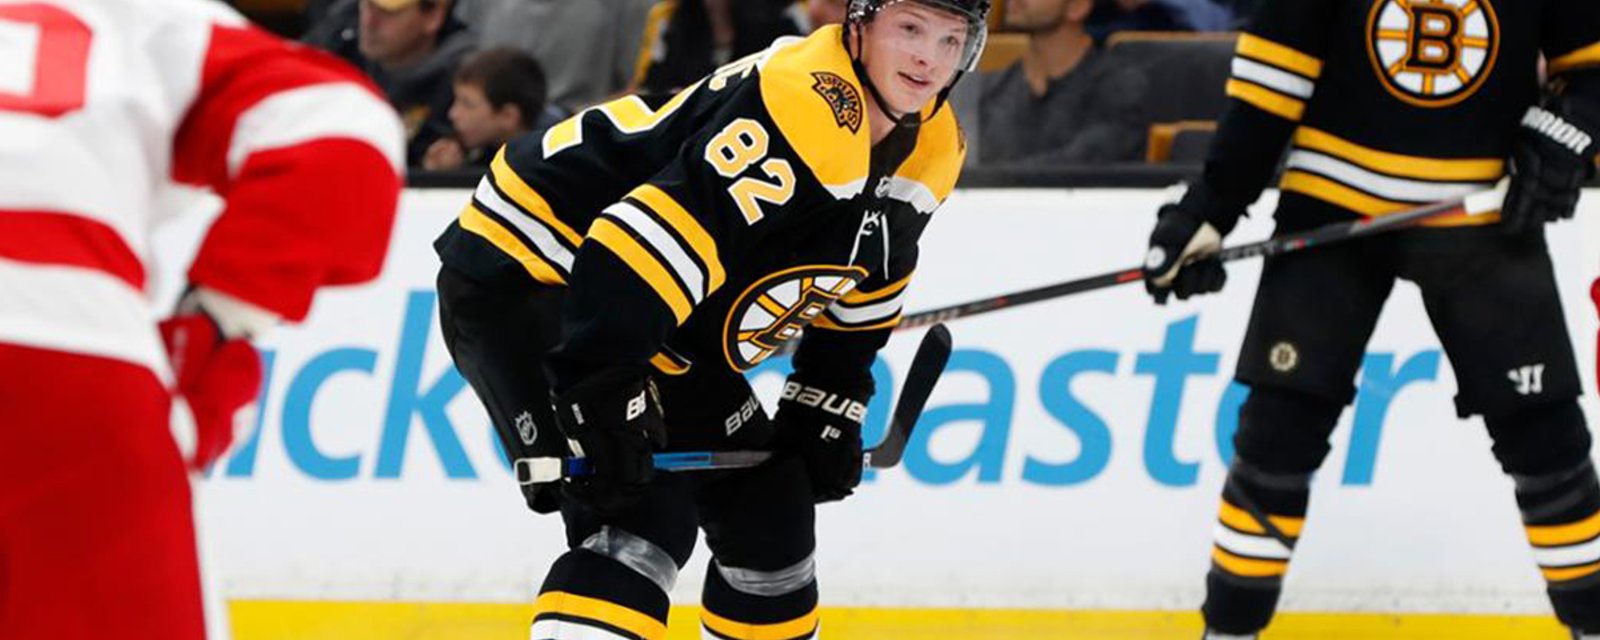 Bruins shuffle lines ahead of big game against Jets